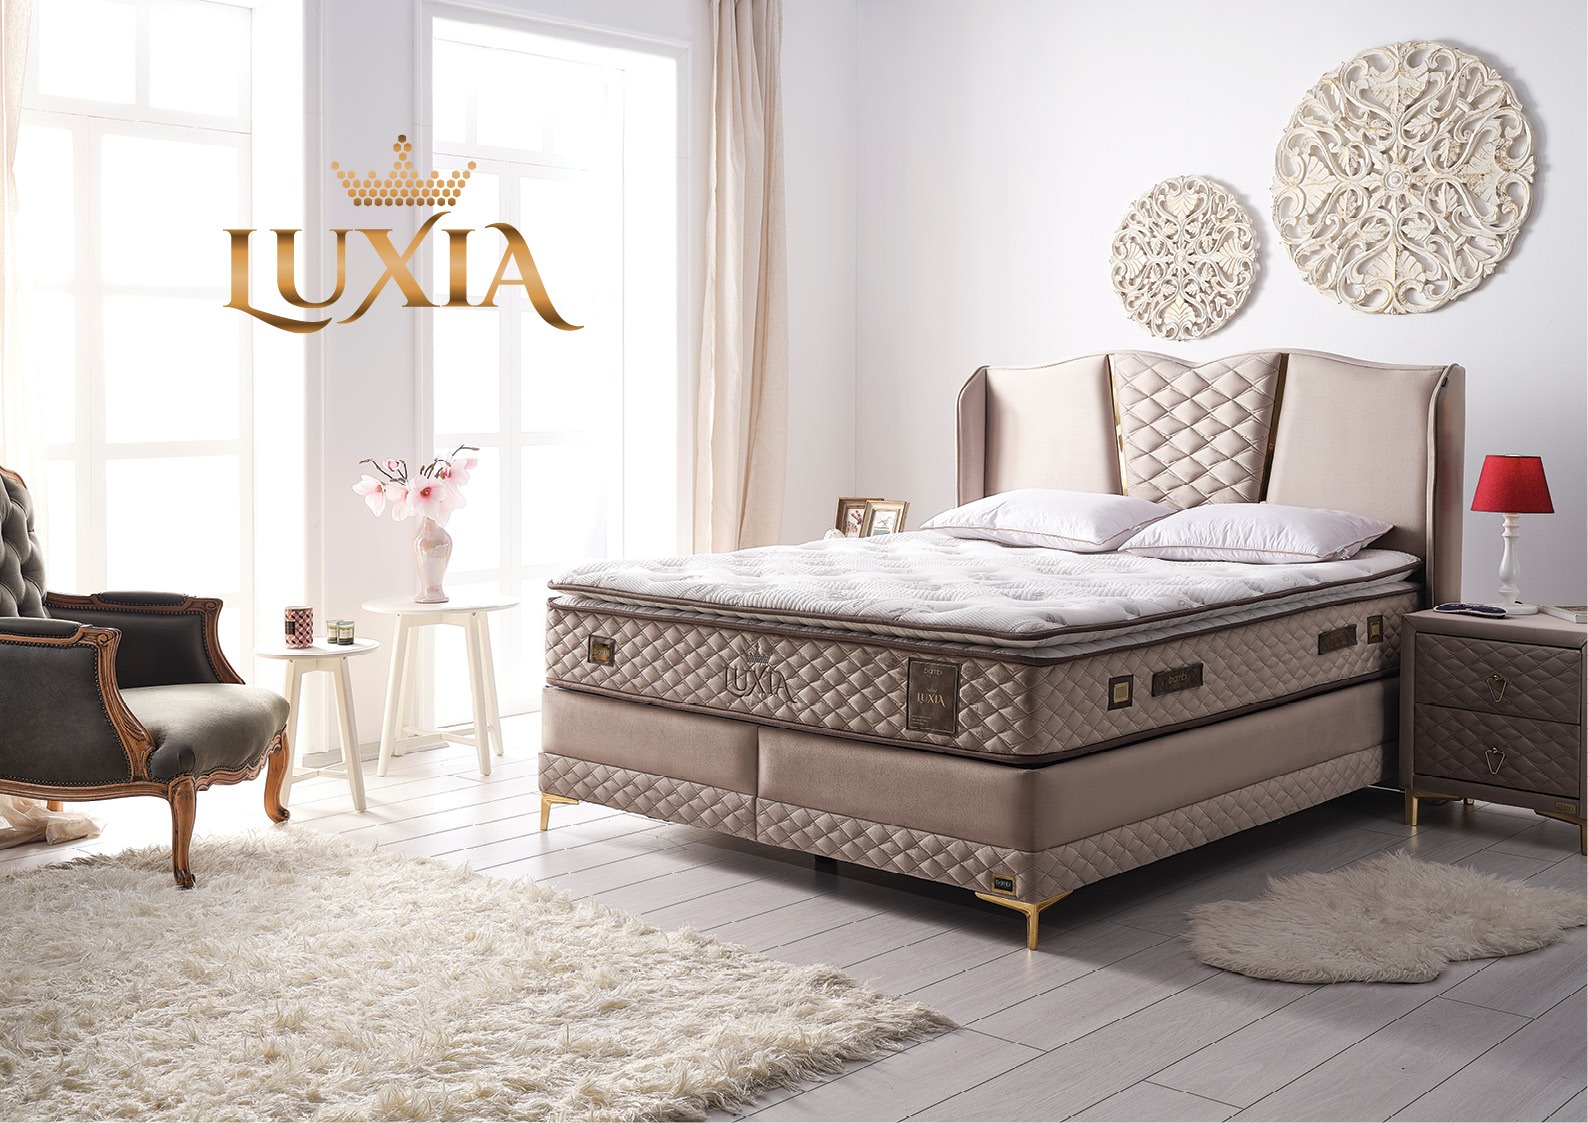 luxia-10